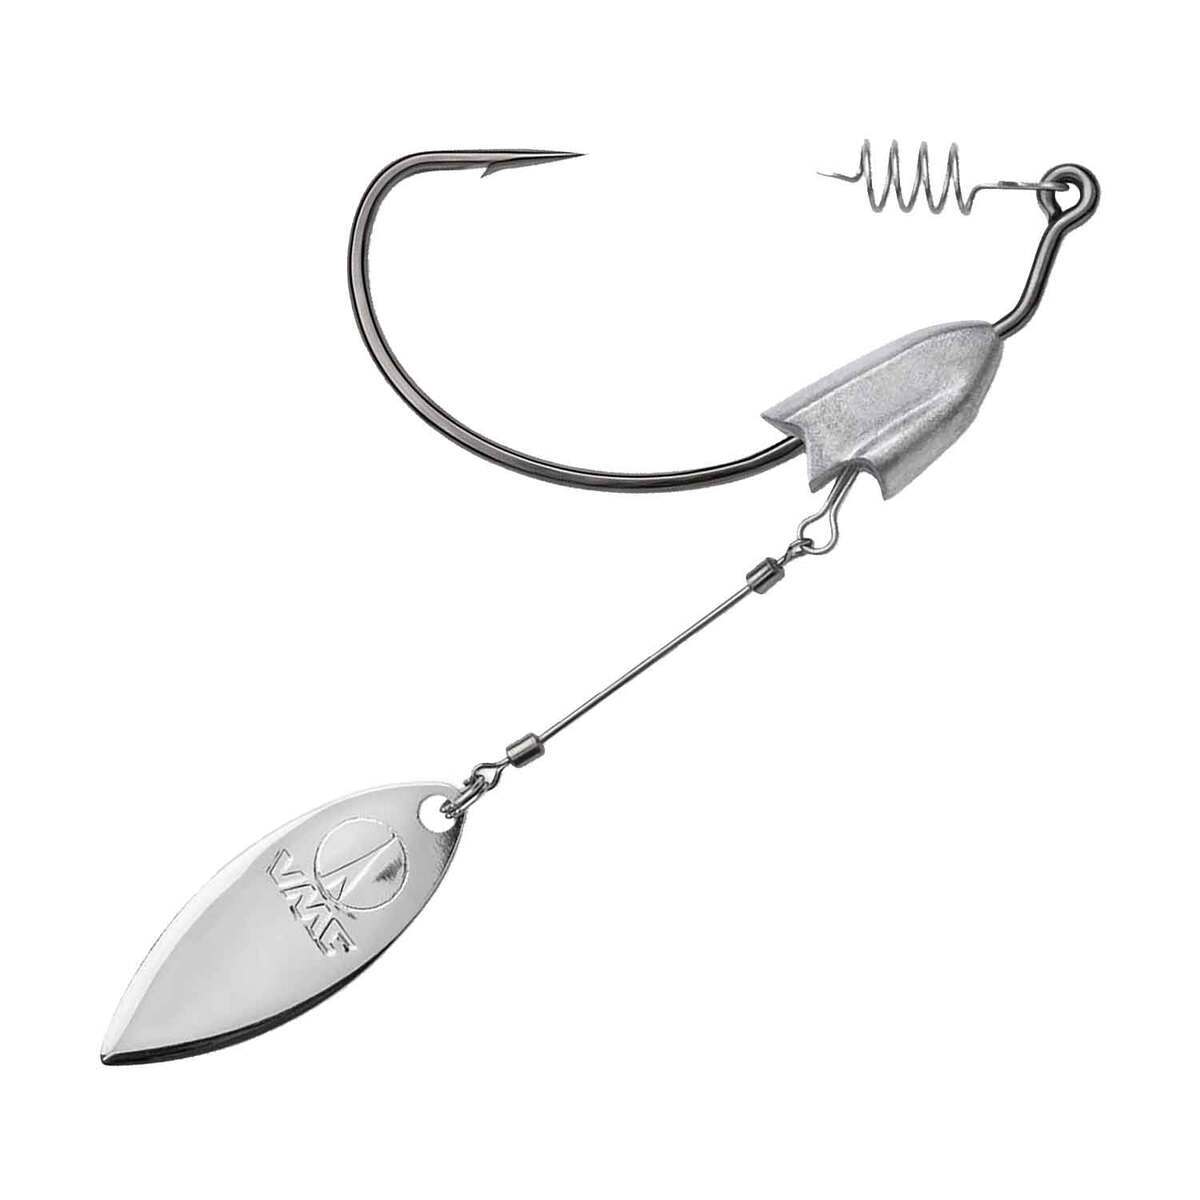 VMC HDWWS Heavy Duty Weighted Willow Swimbait Hook